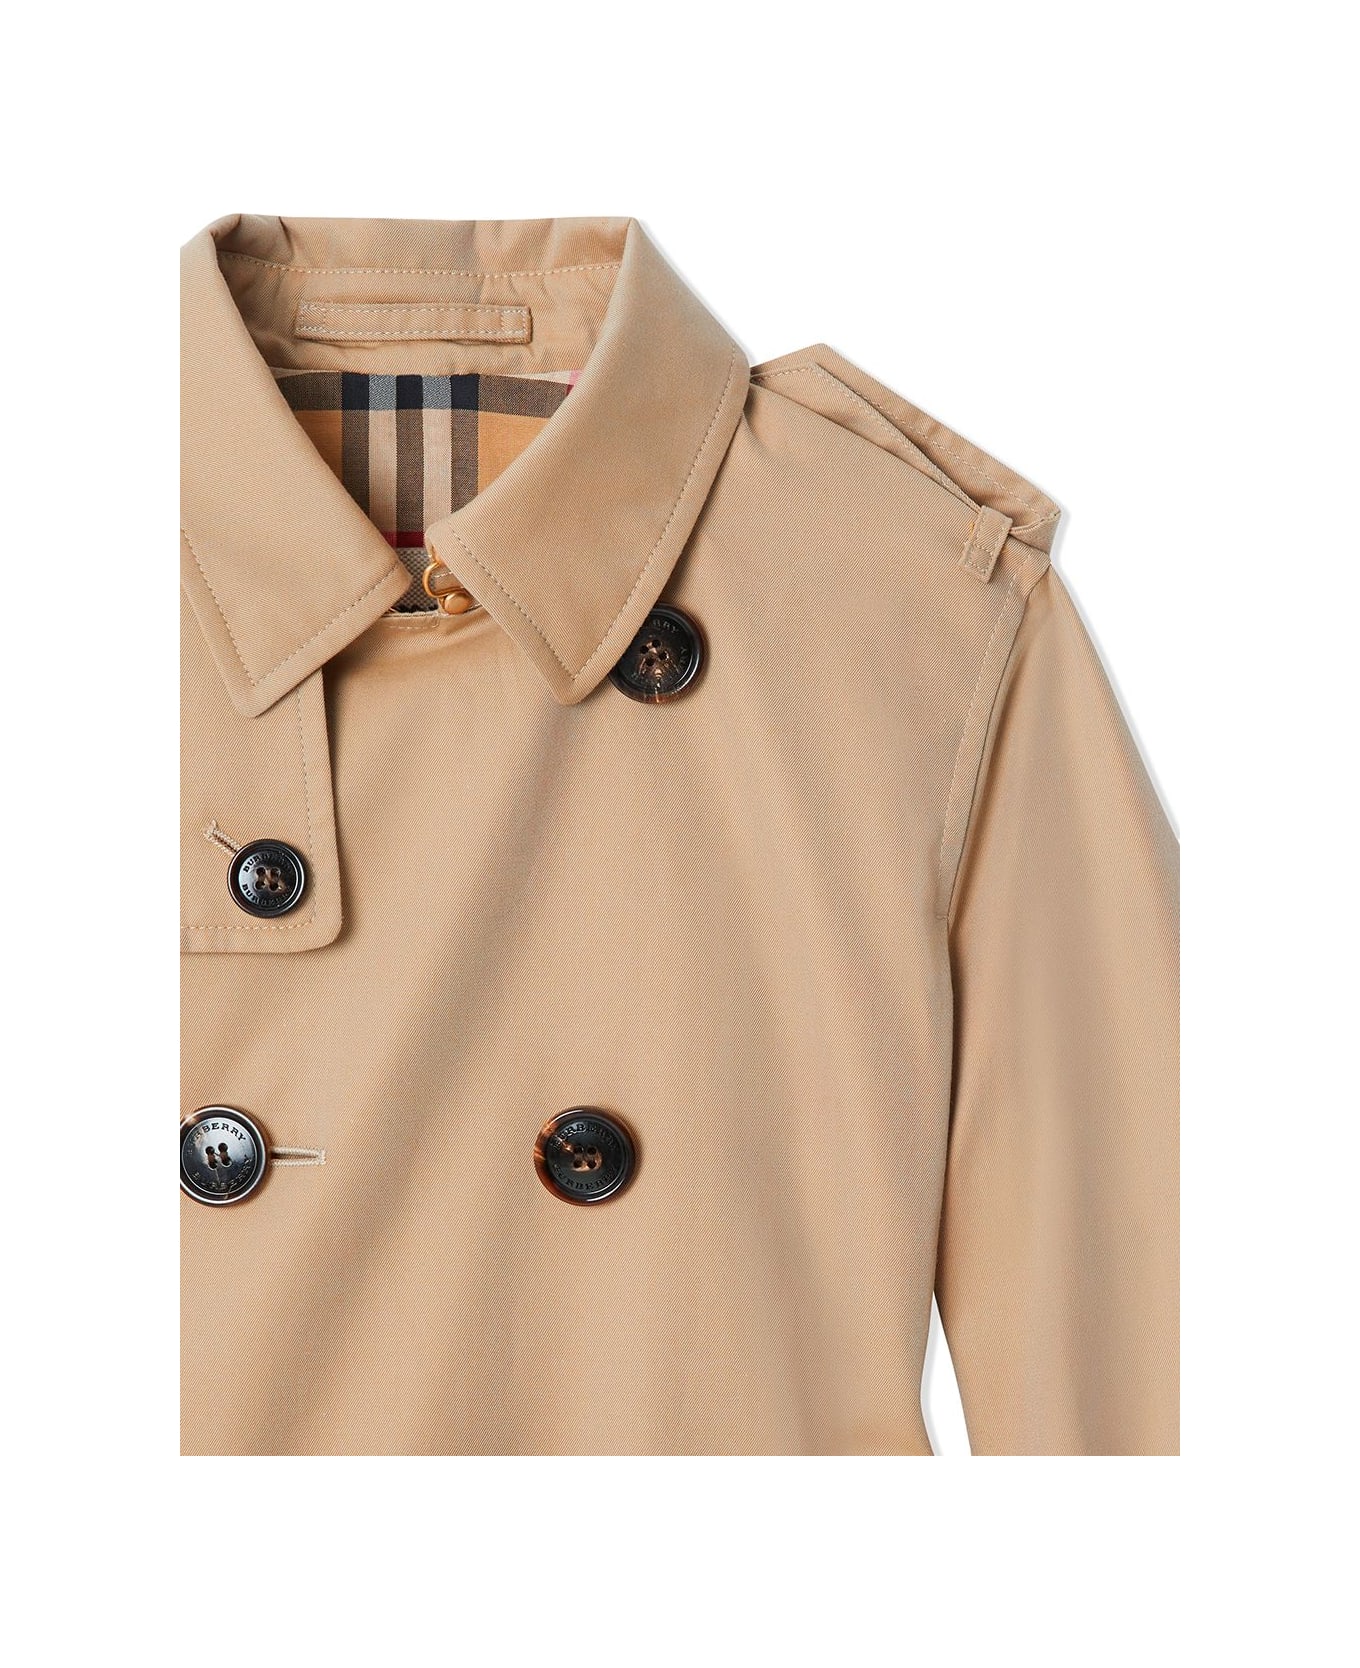 Burberry Kids Girl's Double-breasted Beige Cotton Trench Coat With Vintage Check Inserts - Beige